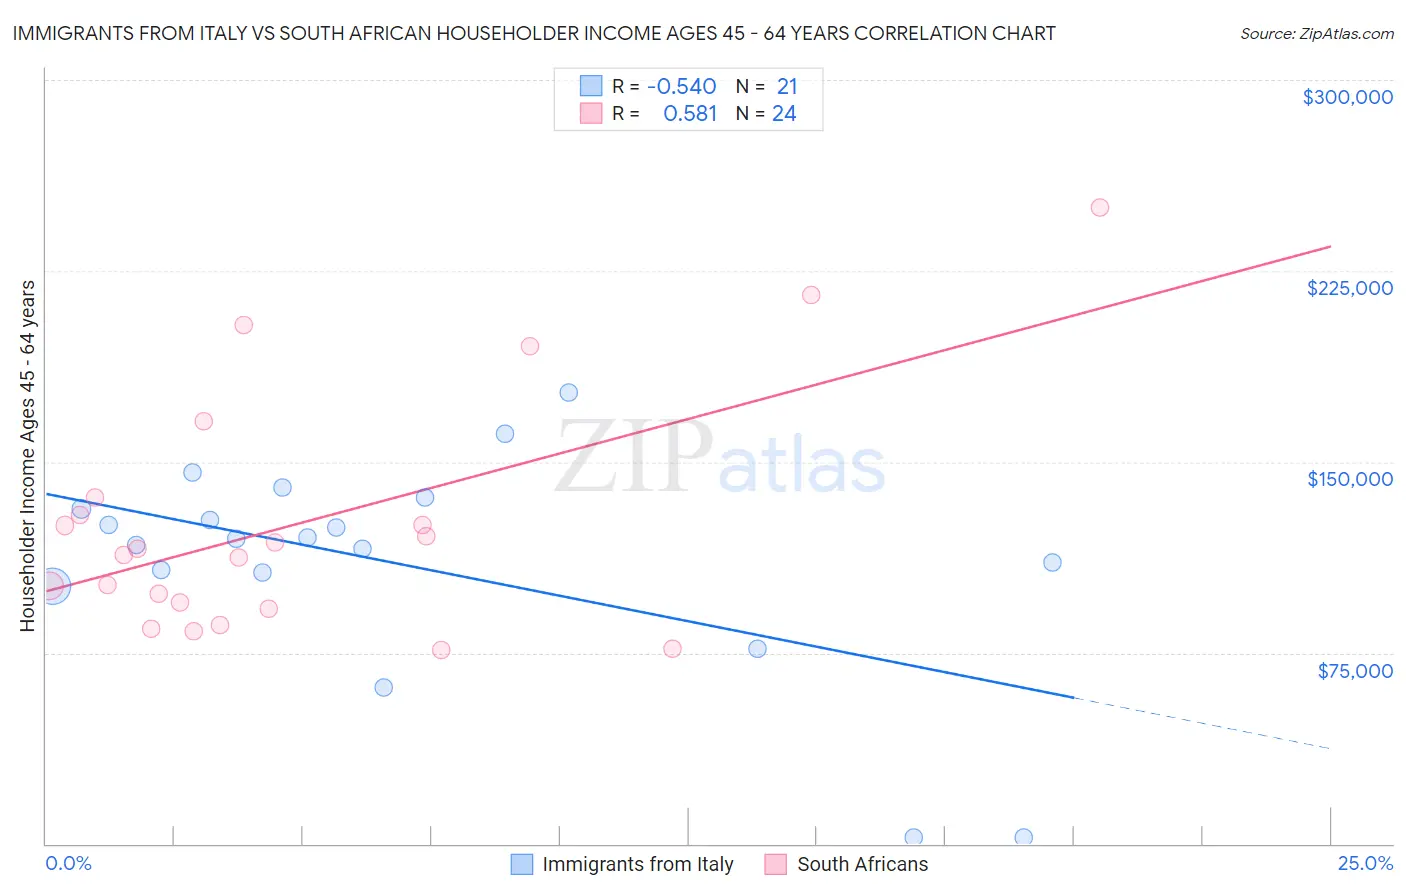 Immigrants from Italy vs South African Householder Income Ages 45 - 64 years